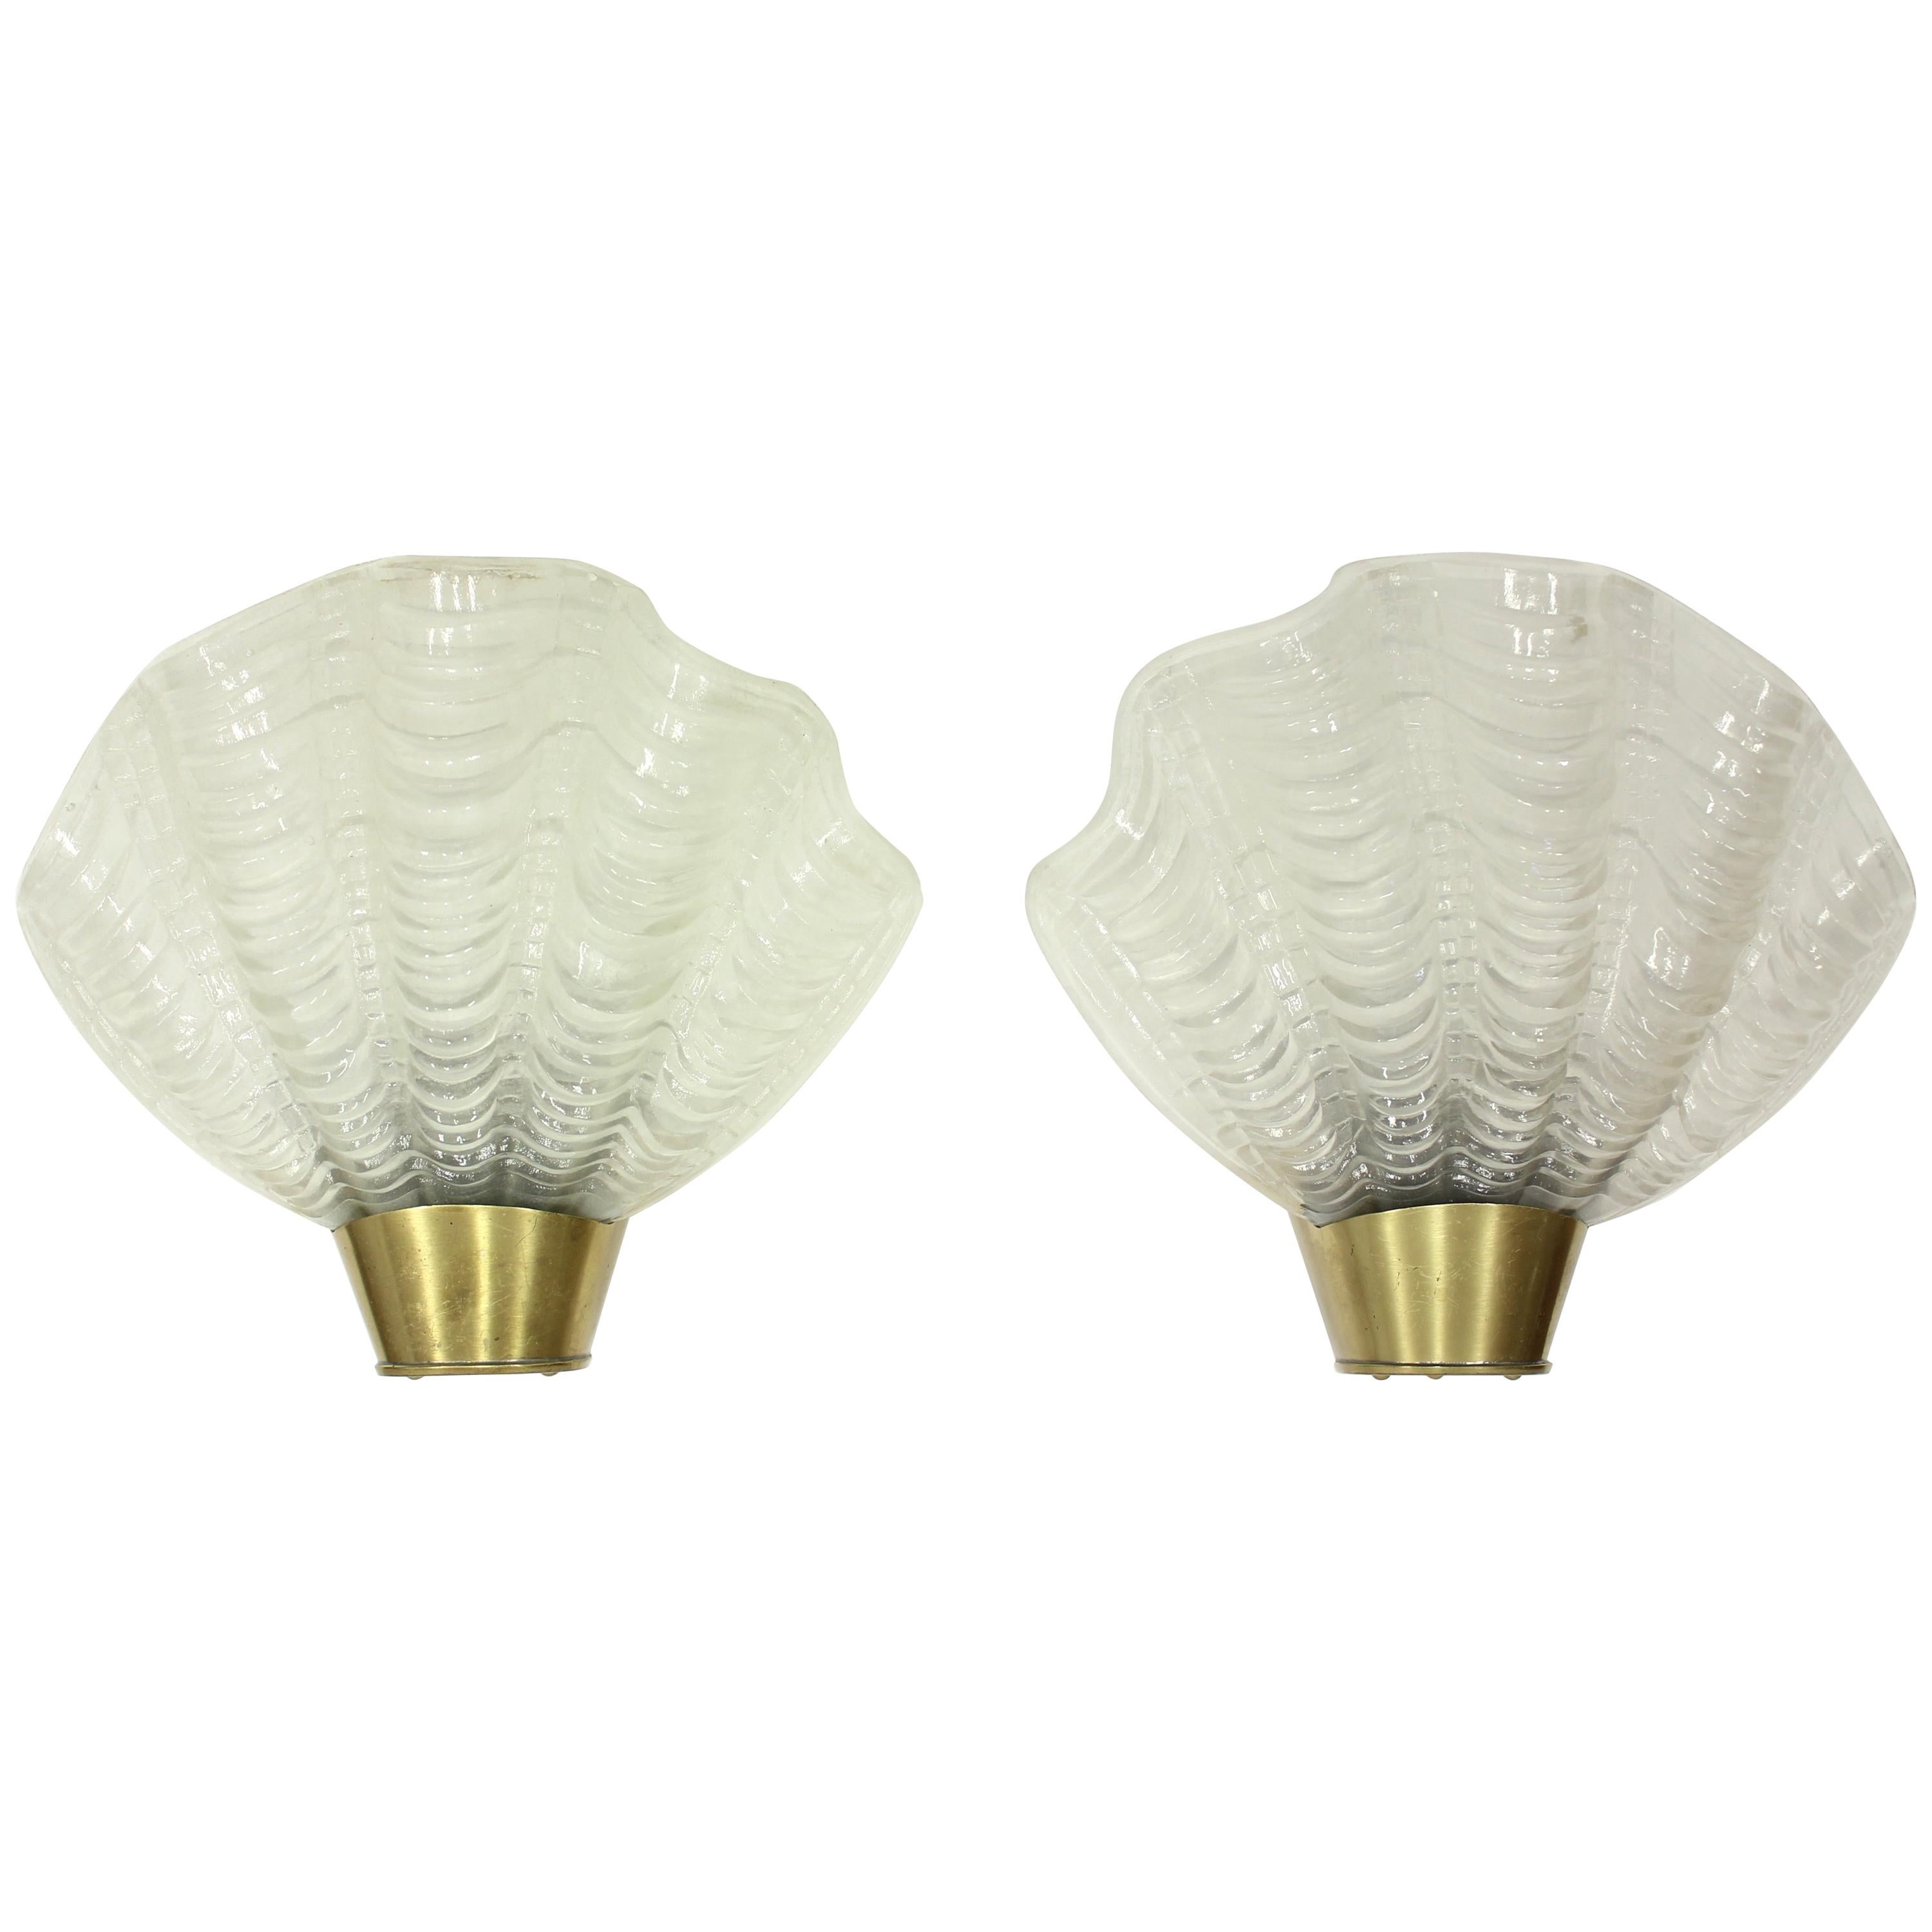 Shell Shaped Wall Sconces, Model Coquille, from ASEA, 1940s, Set of Two